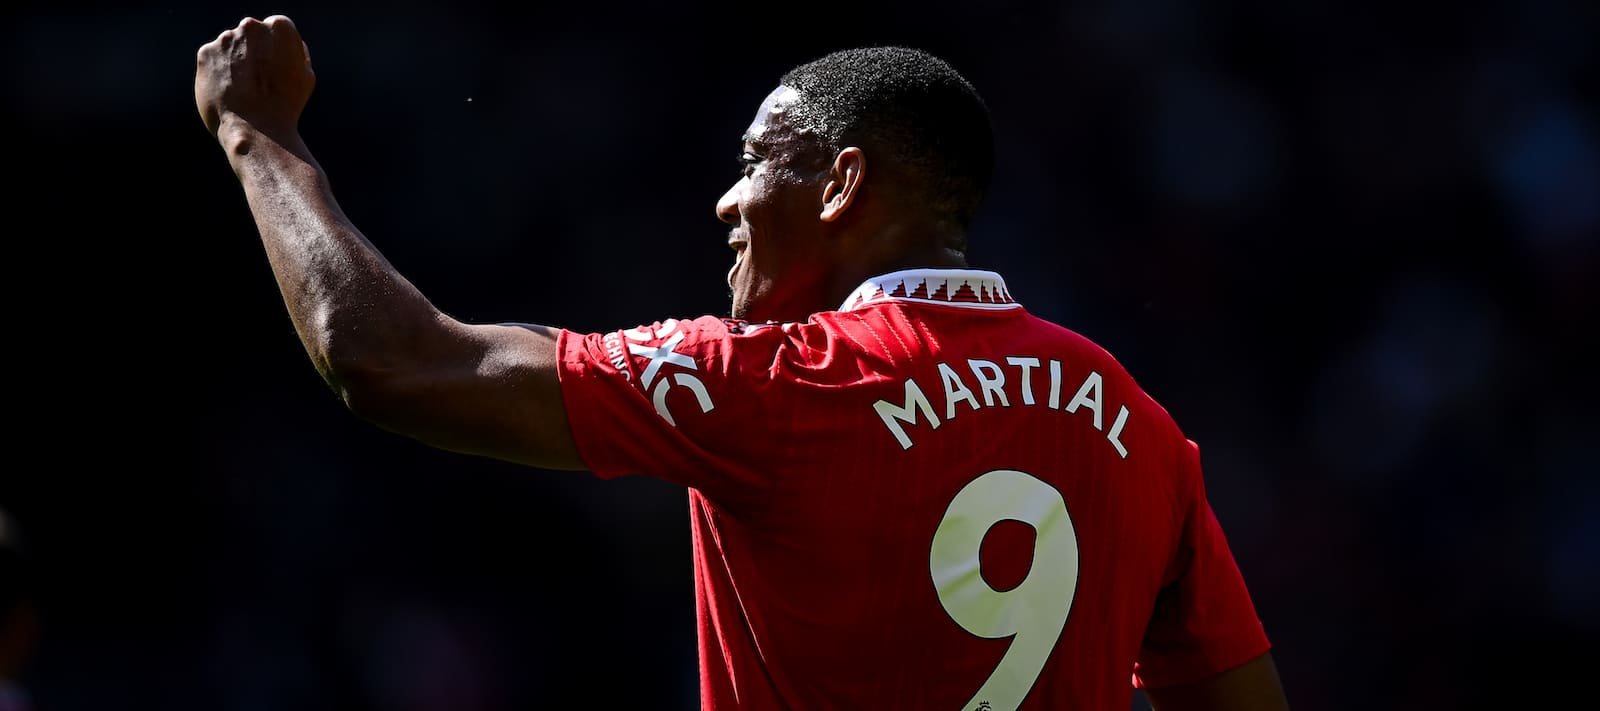 Anthony Martial’s most likely destination after Man United is Ligue 1 – Man United News And Transfer News